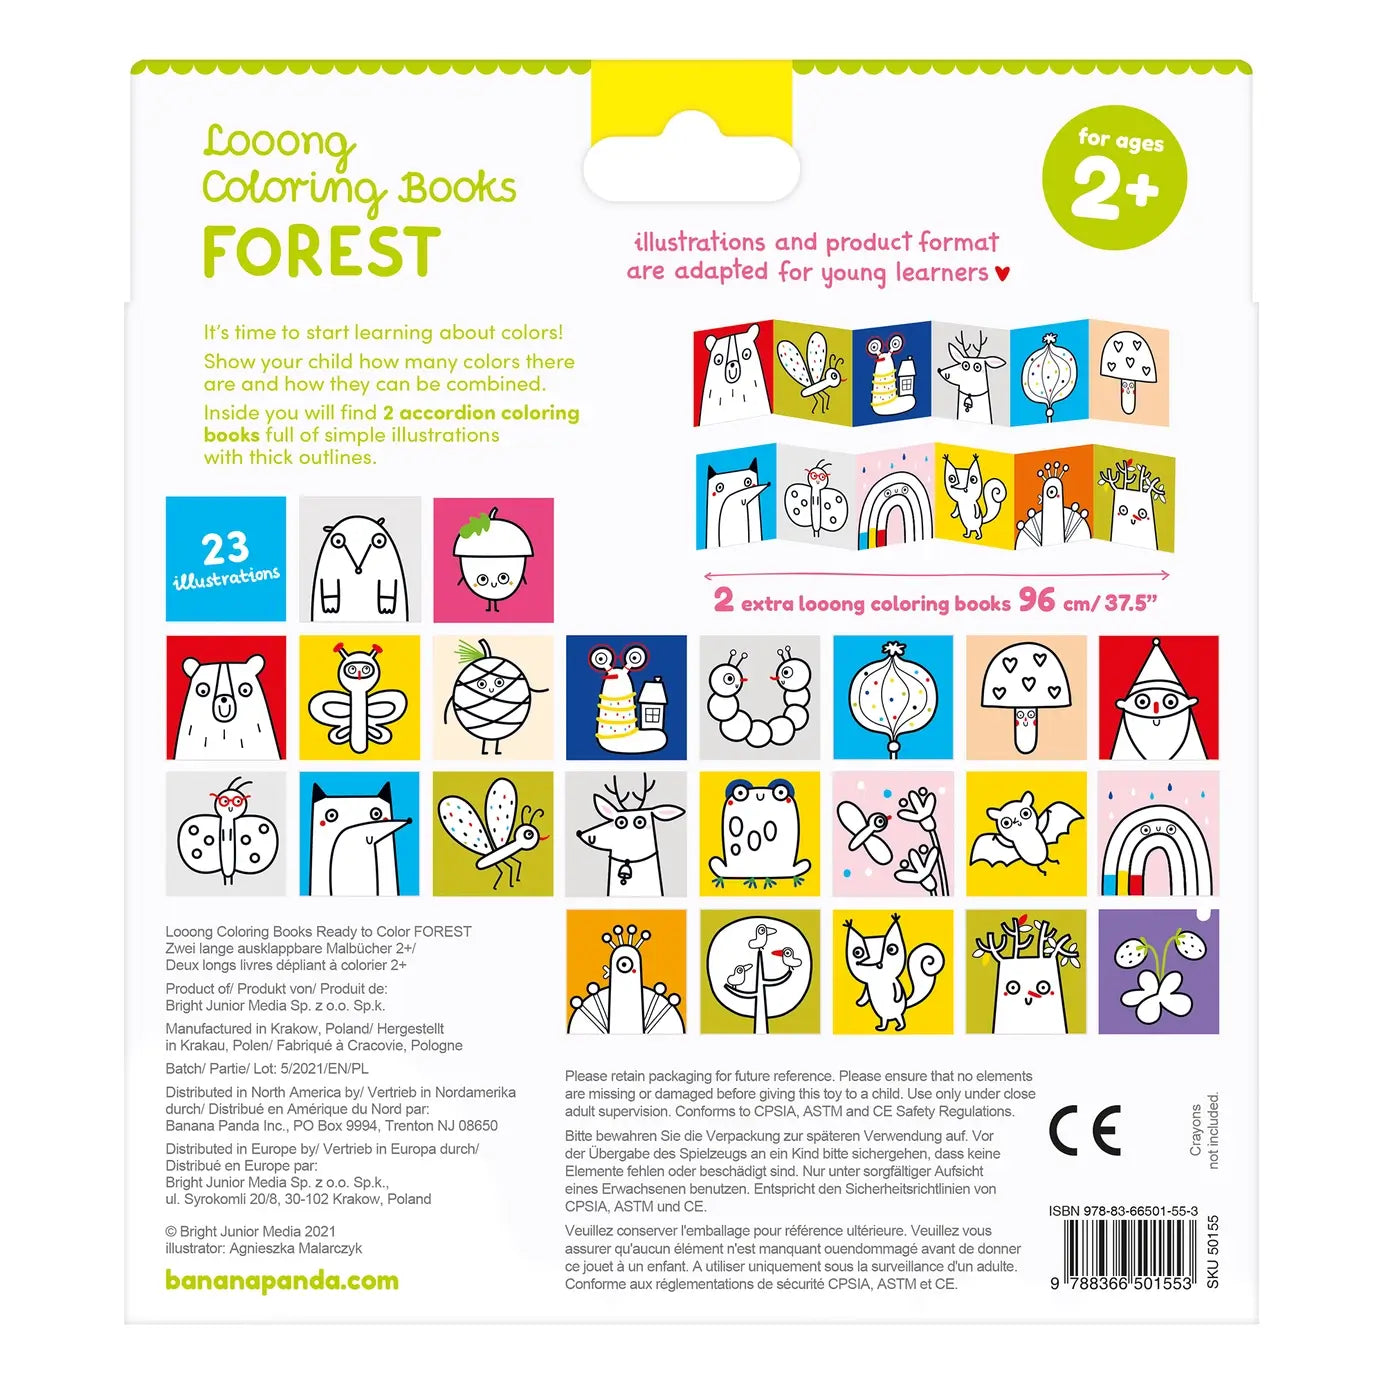 Looong Coloring Books Forest | Sudha's Emporium